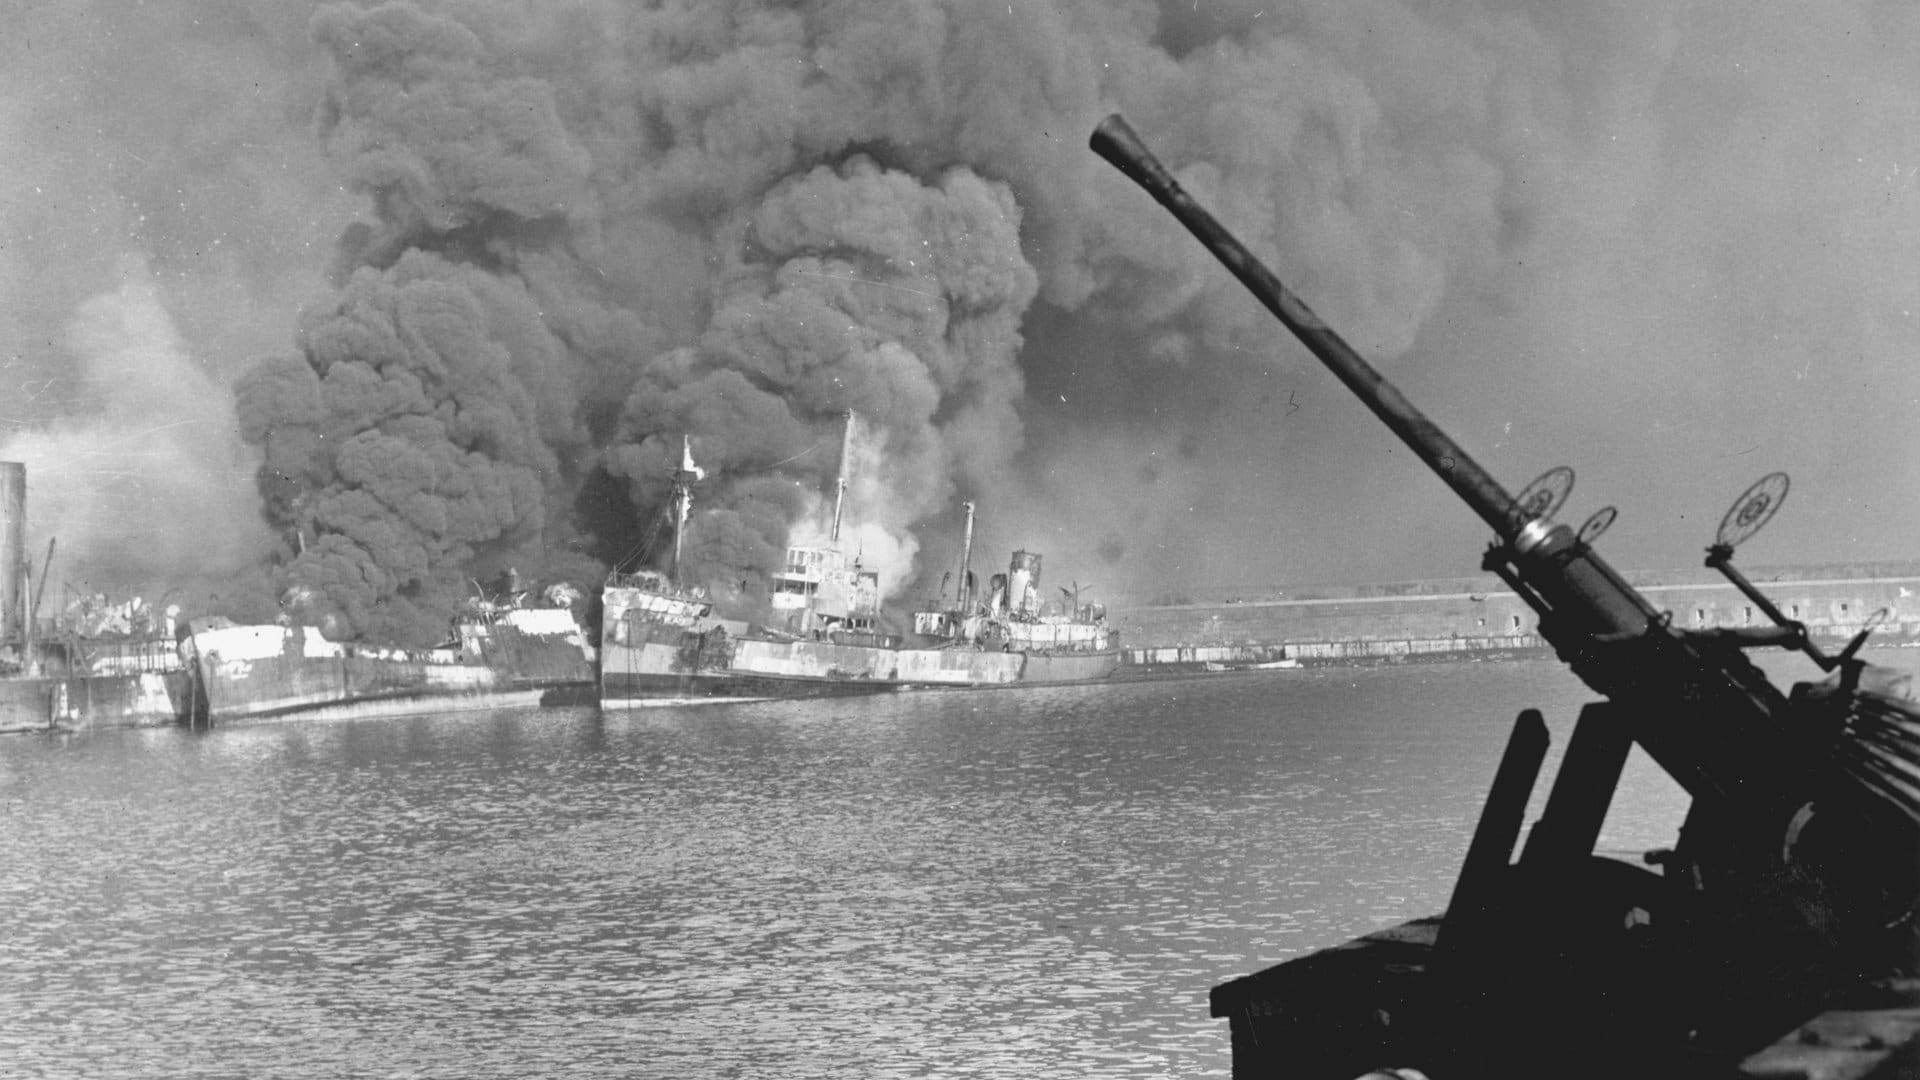 On a December night in 1942, the Luftwaffe bombed an Allied port in Bari, Italy, sinking more than 17 ships and killing thousands.